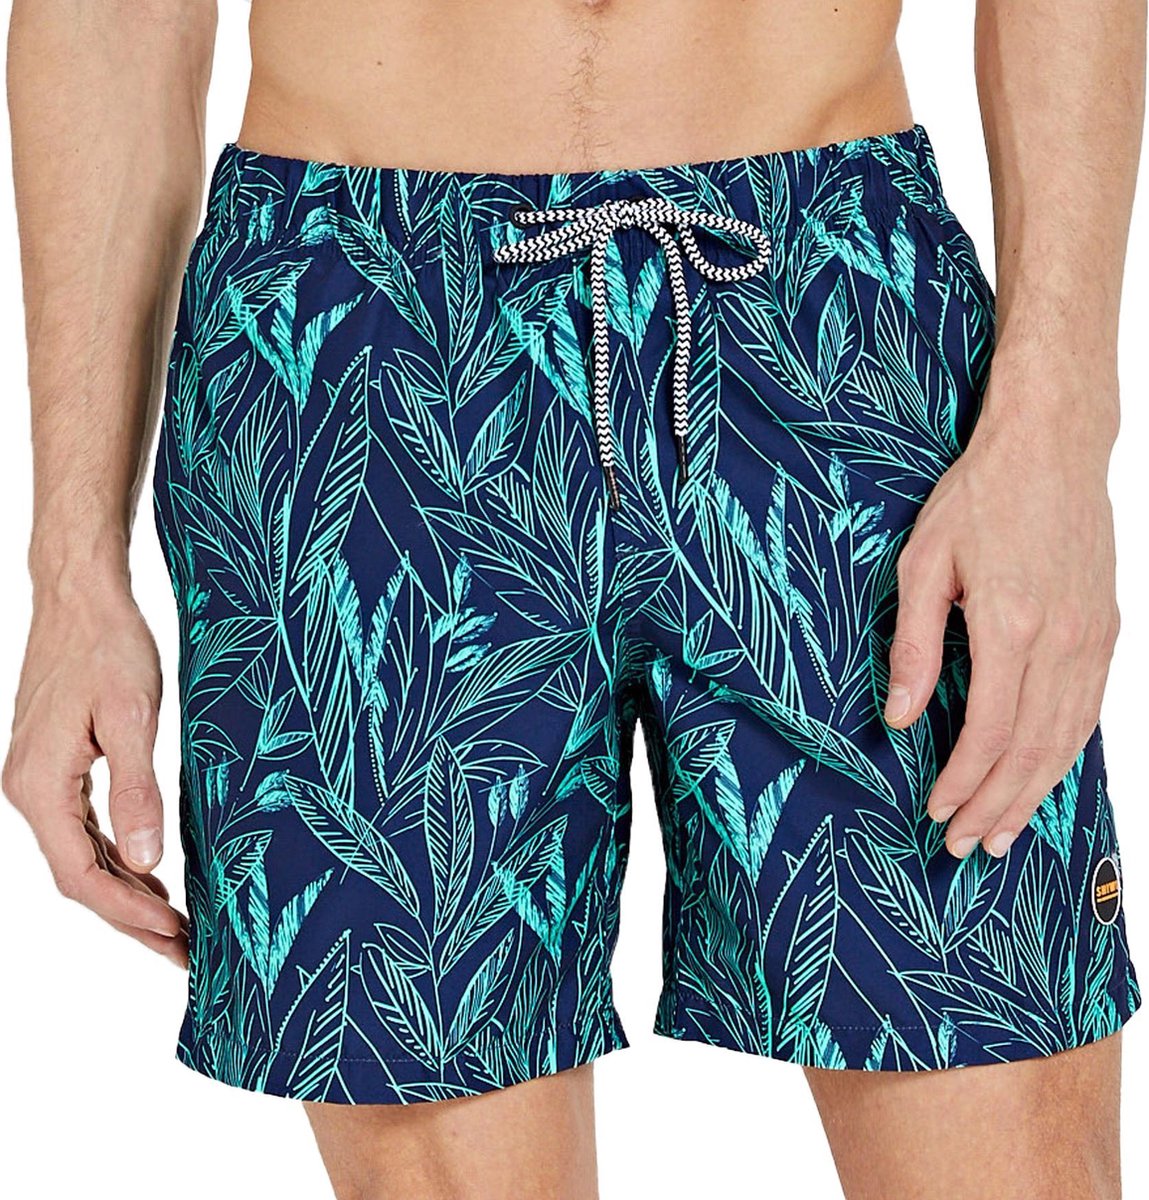 Shiwi Scratched Leaves  Zwembroek - Mannen - navy - blauw - SHIWI